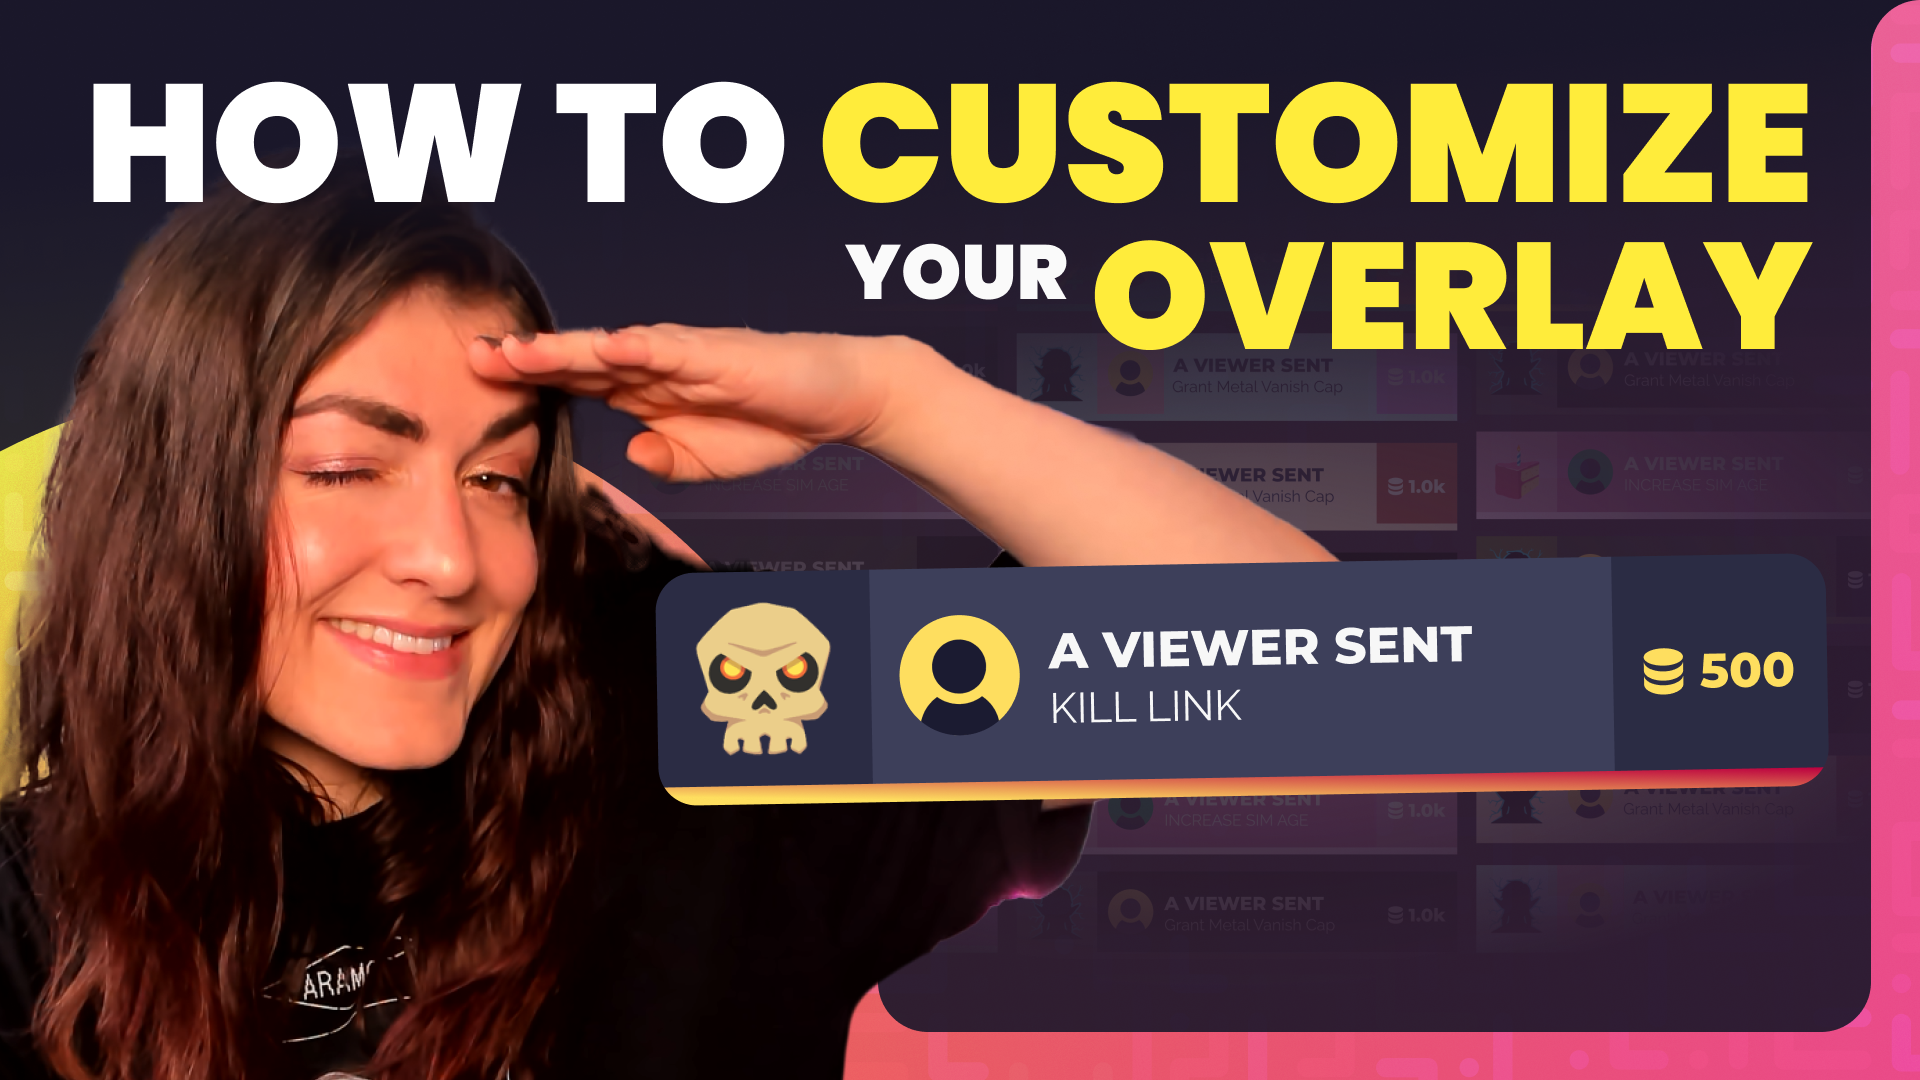 How to Customize Your Crowd Control Overlay